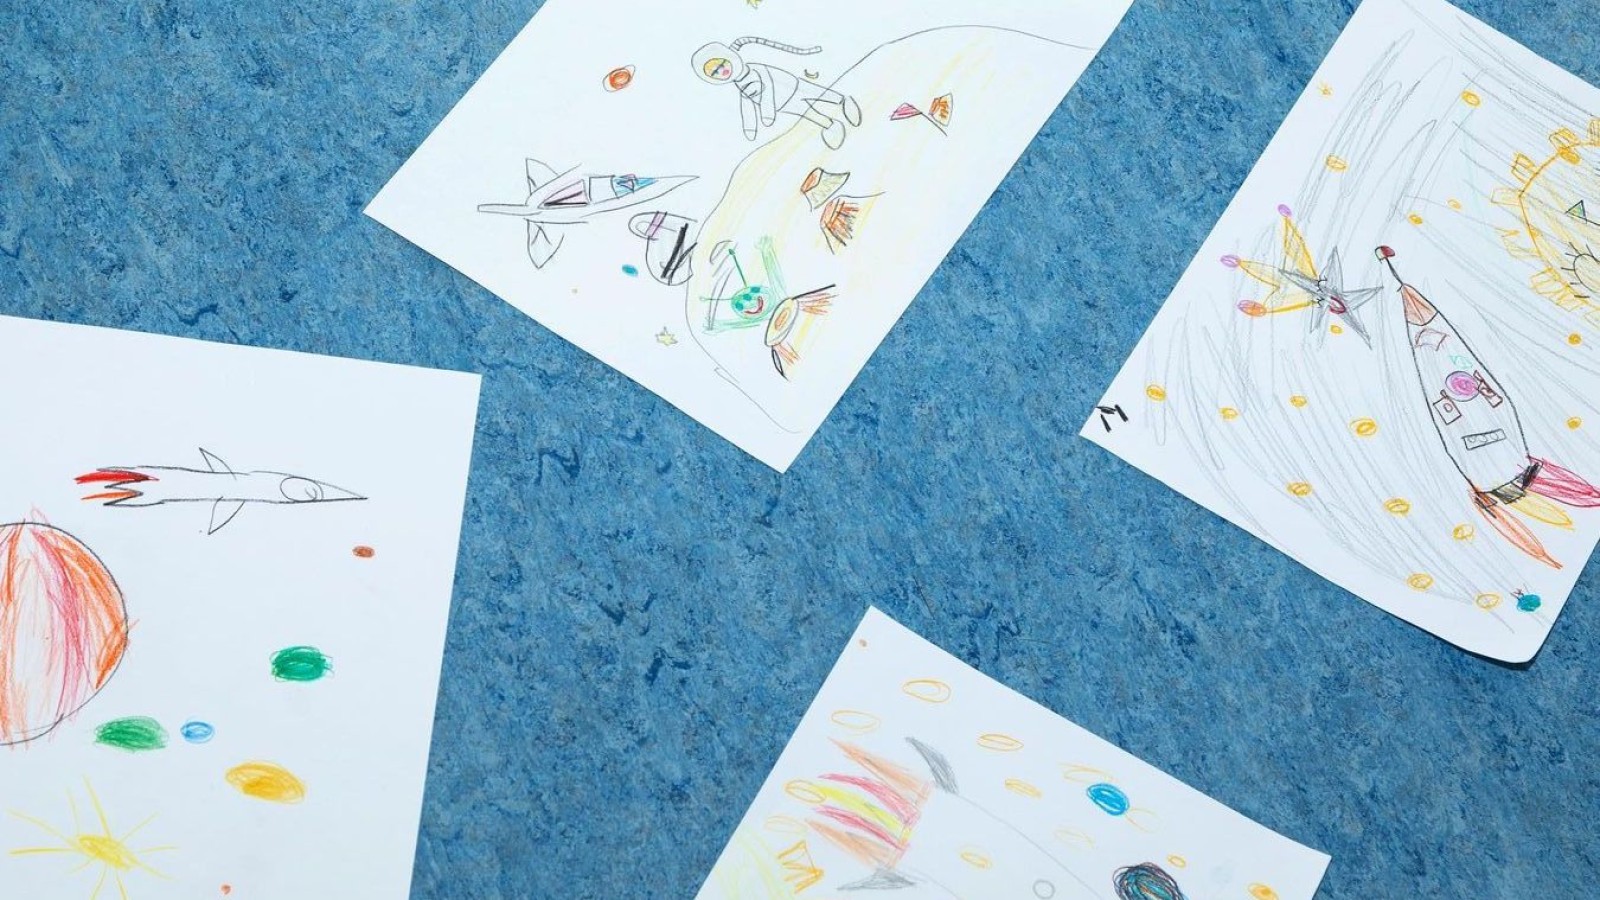 Children's drawings on the topic of space: Greetings from children!